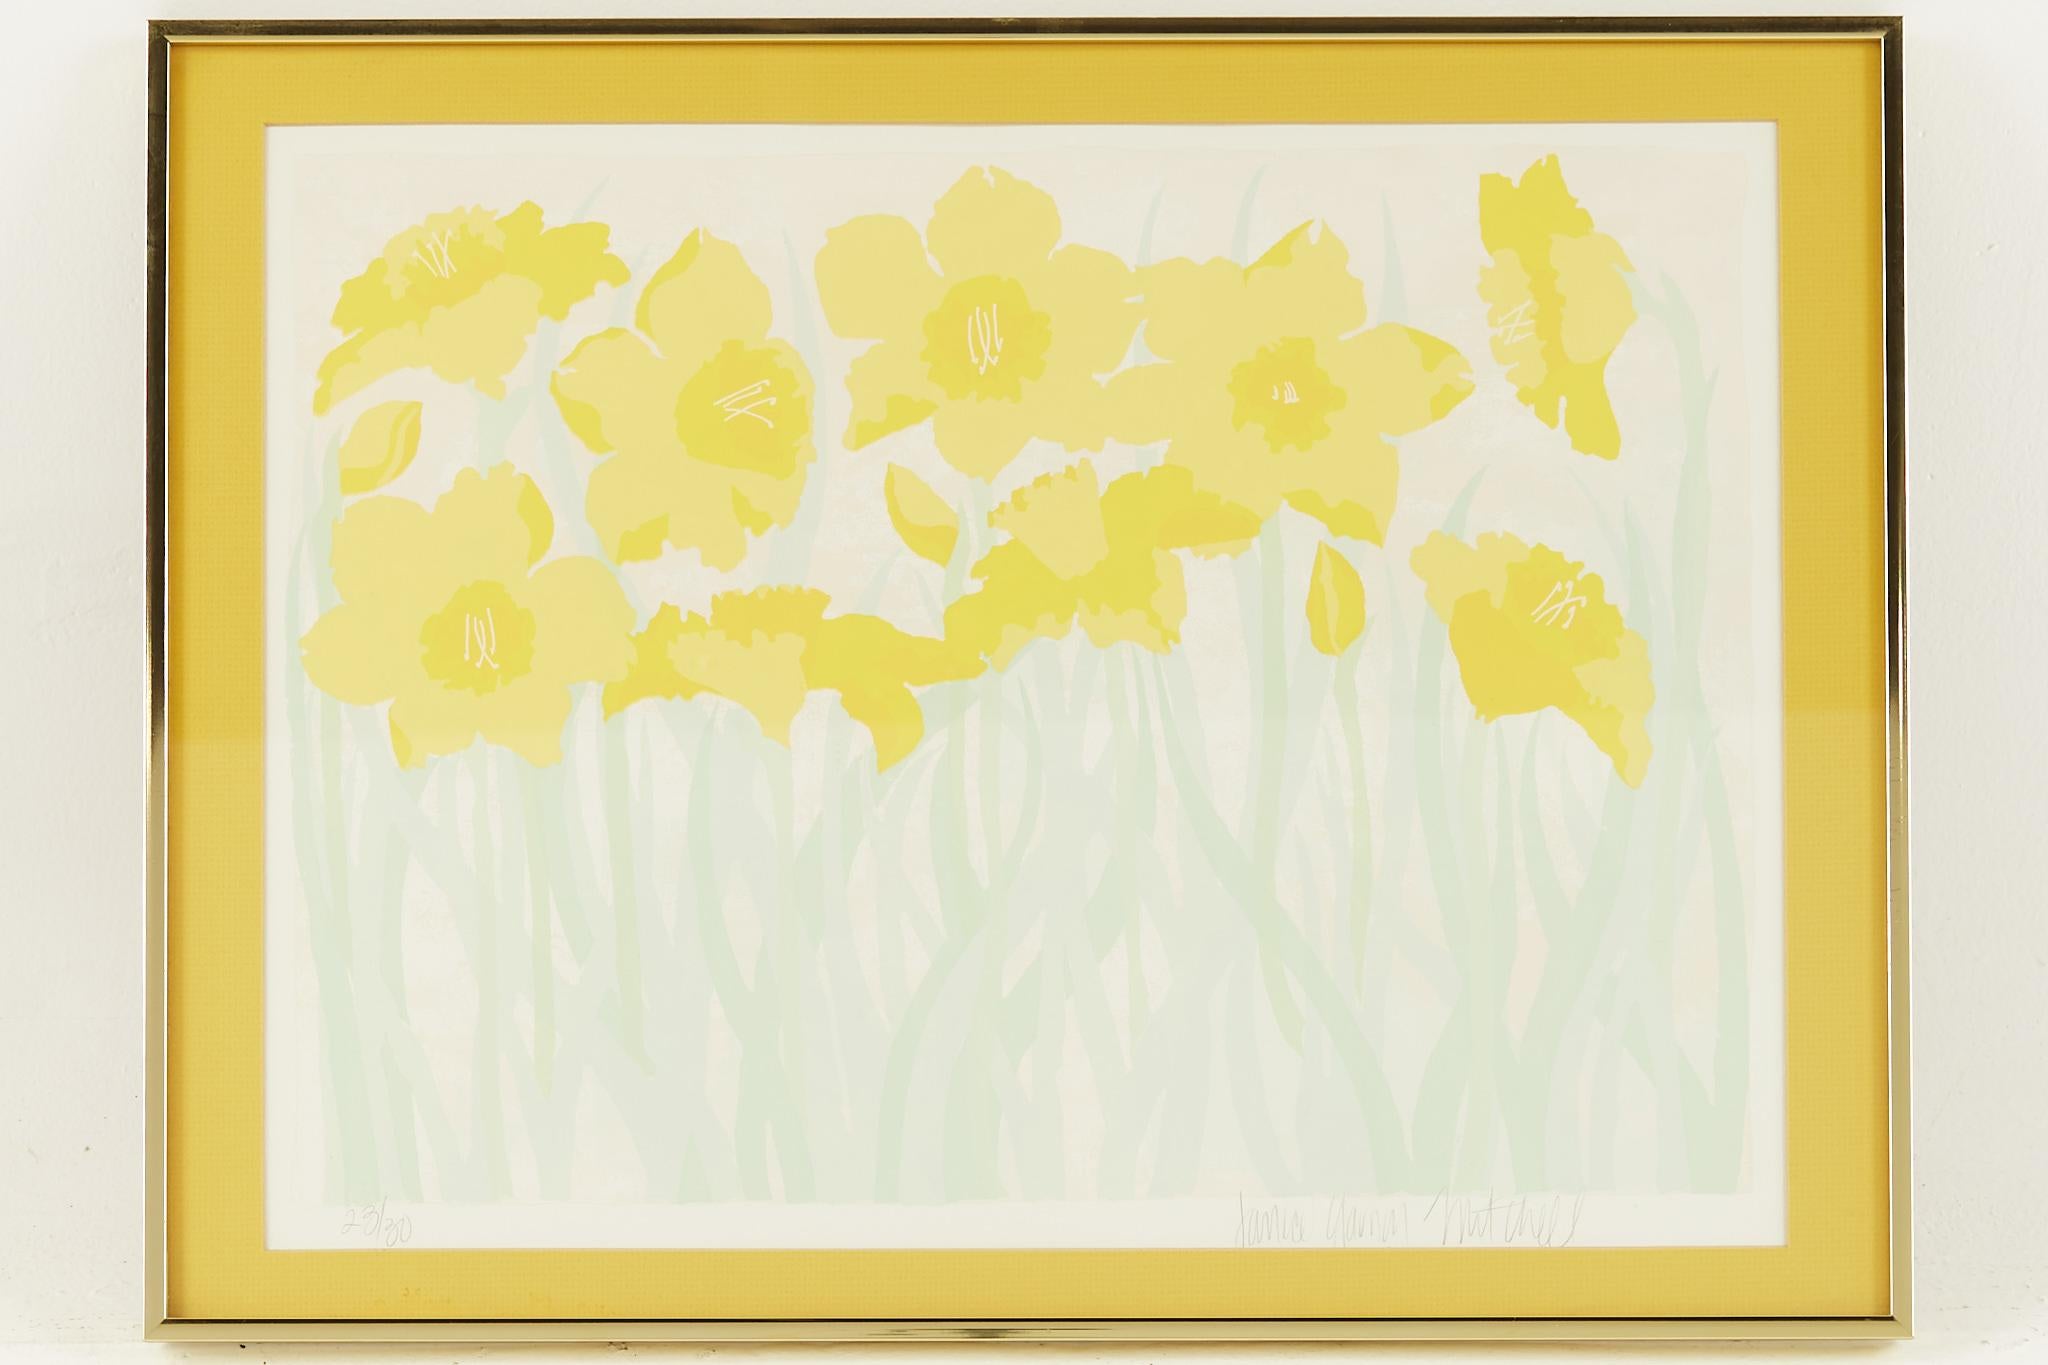 Janice Garnon Mitchell Mid century screen print of yellow day lilies

This print measures: 24.25 wide x .75 deep x 18.25 inches high

This Print is in Good Vintage Condition

We take our photos in a controlled lighting studio to show as much